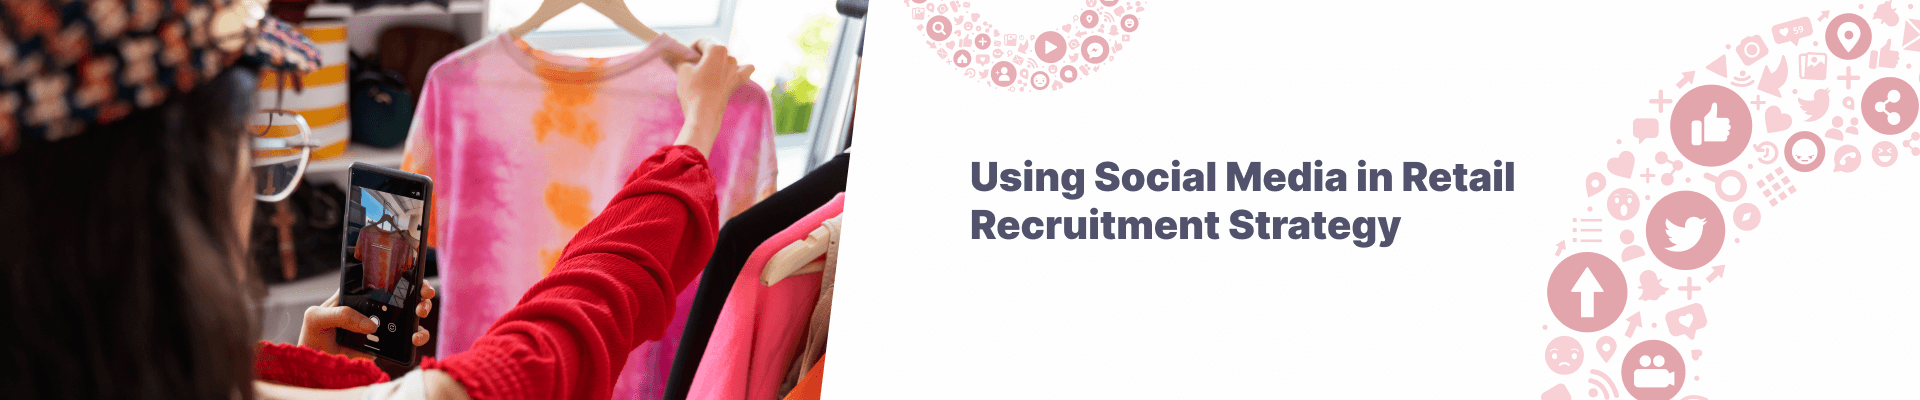 using social media in retail recruitment strategy